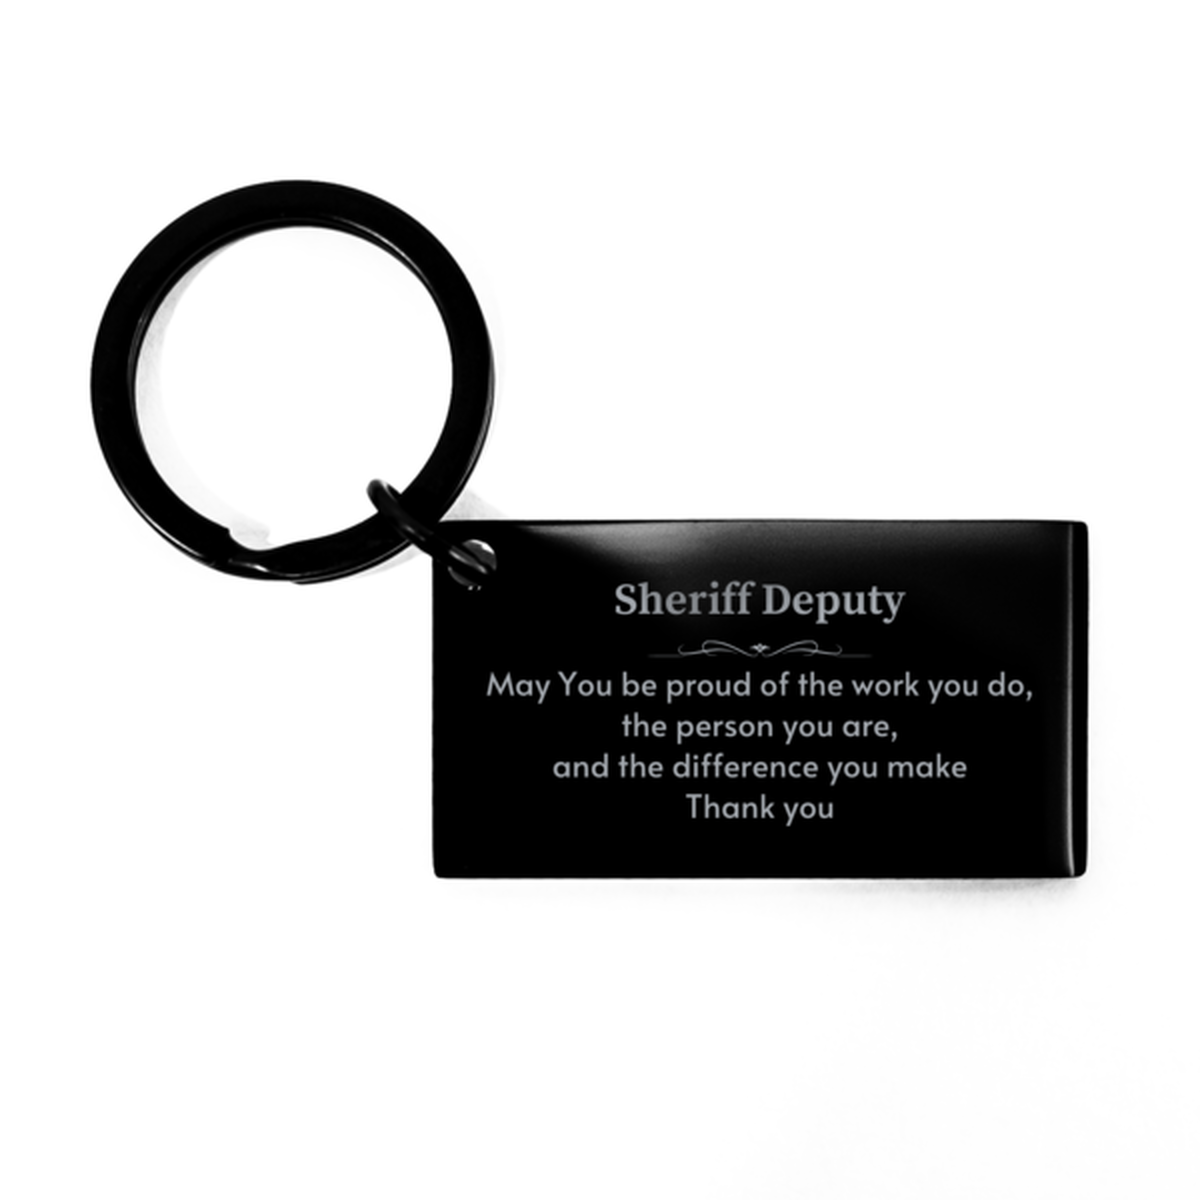 Heartwarming Keychain Retirement Coworkers Gifts for Sheriff Deputy, Vice-principal May You be proud of the work you do, the person you are Gifts for Boss Men Women Friends